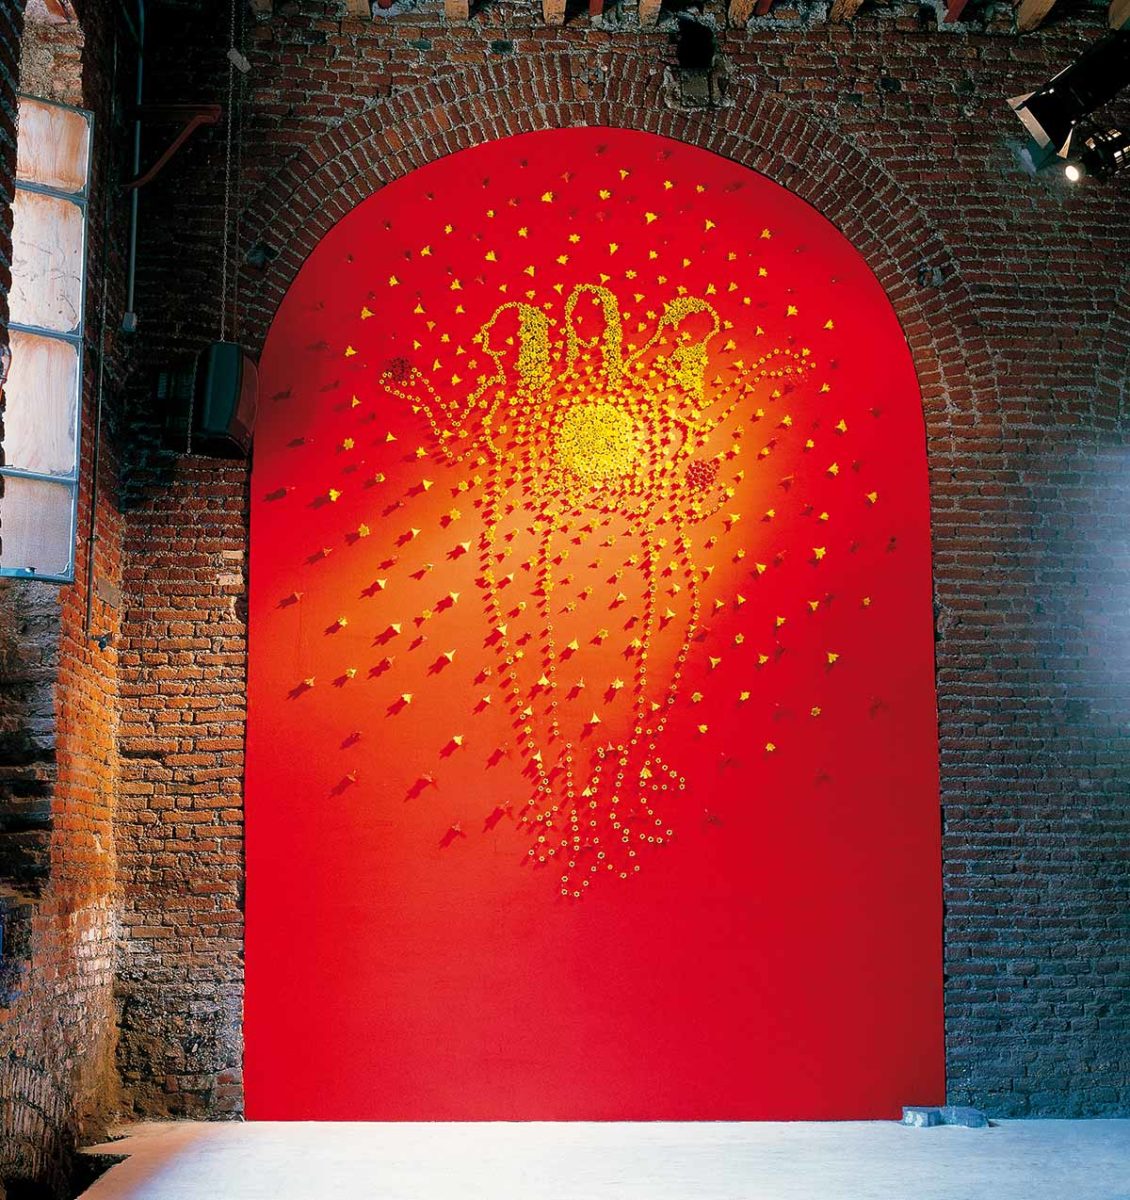 The sun 1998, Installation made by Kazumasa Mizokami, the three goddesses are outlined with small yellow flowers on a bright red arched panel.   the other yellow flowers spread making the shape of a circle around the goddesses